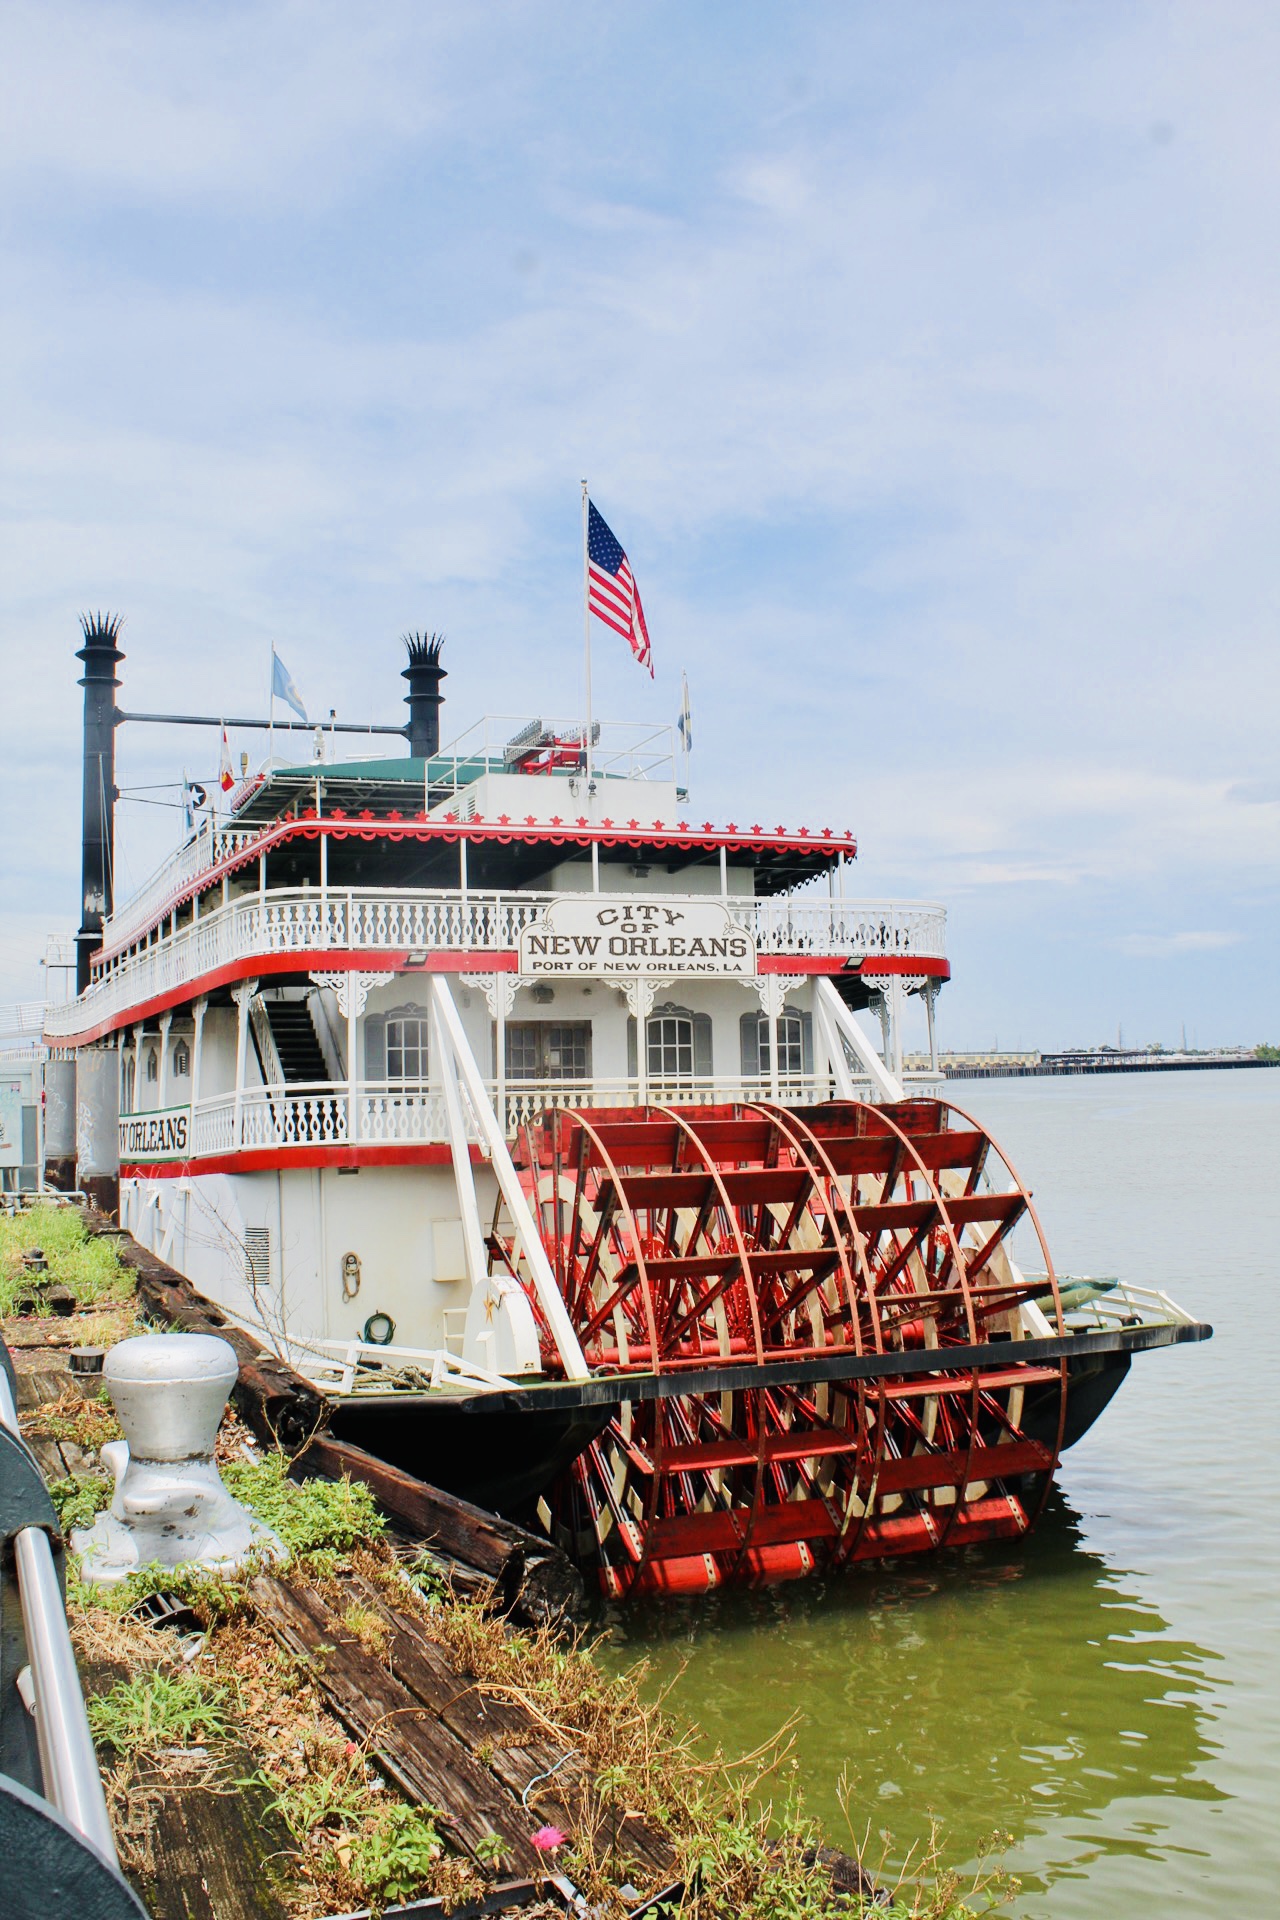 10 Reasons to go on a New Orleans River Cruise and 10 tips to make the most of your experience